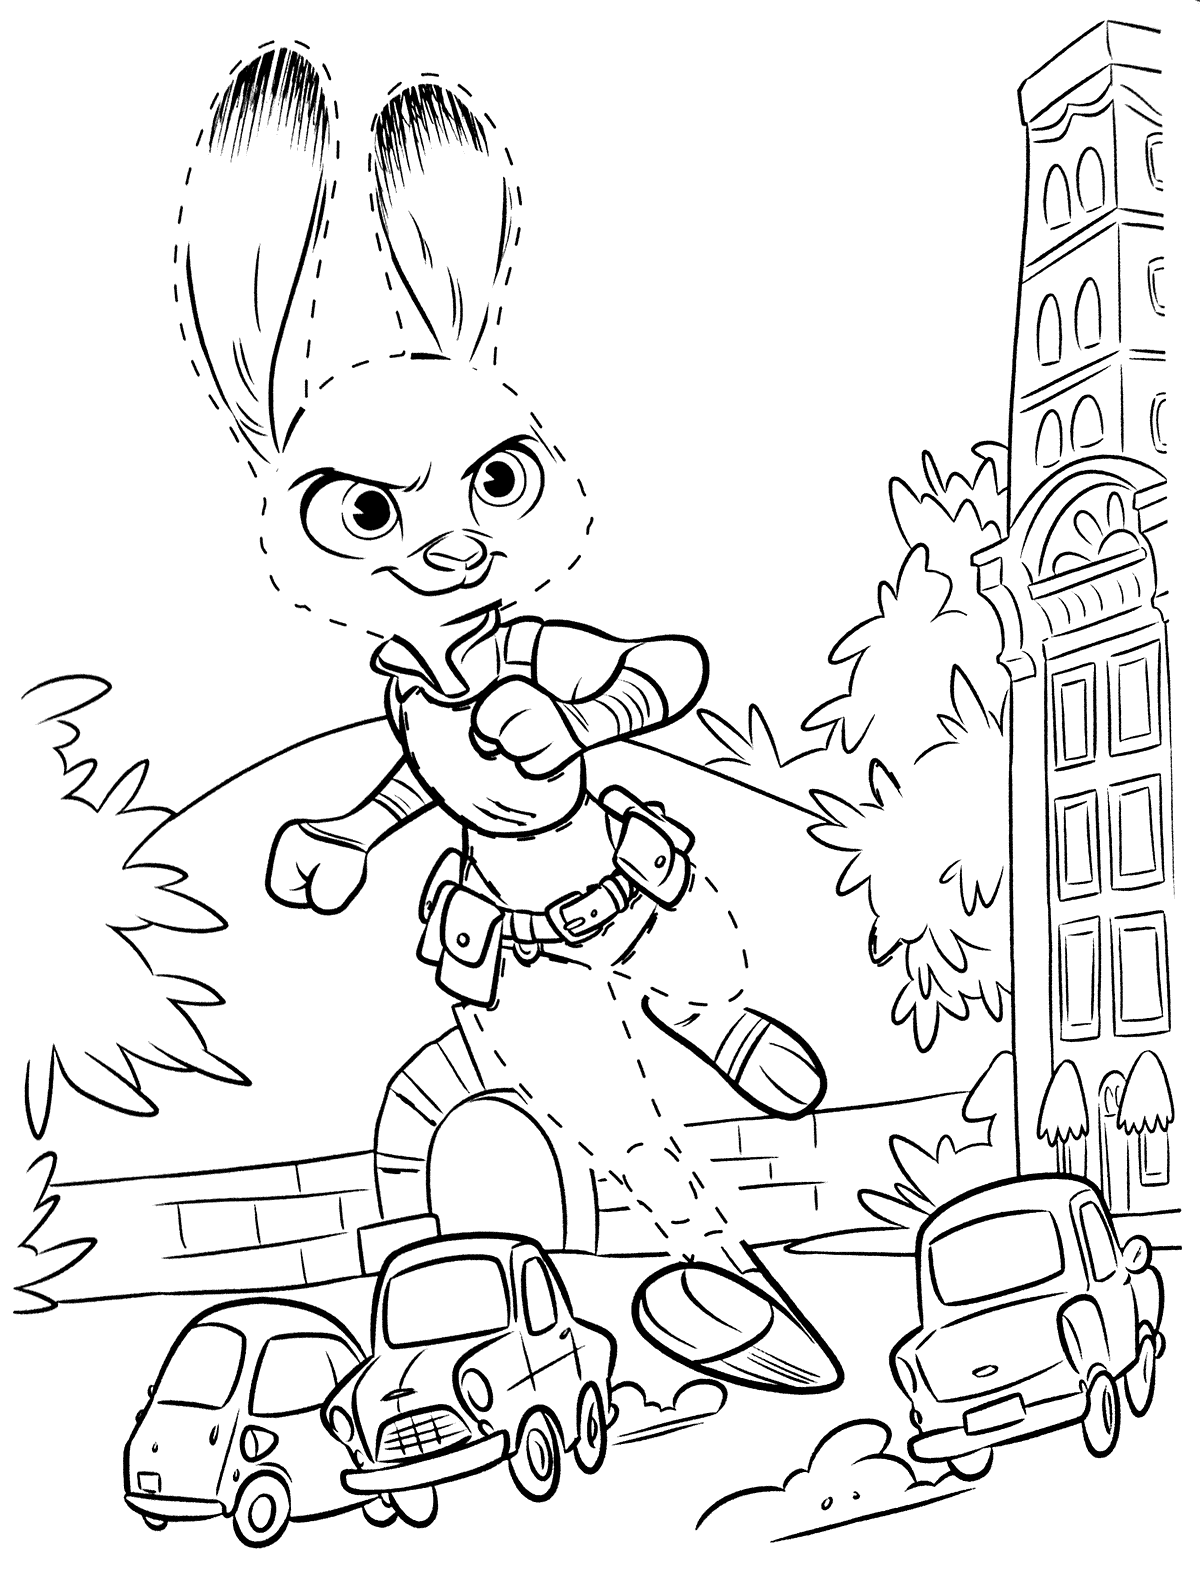 zootopia coloring pages best coloring pages for kids